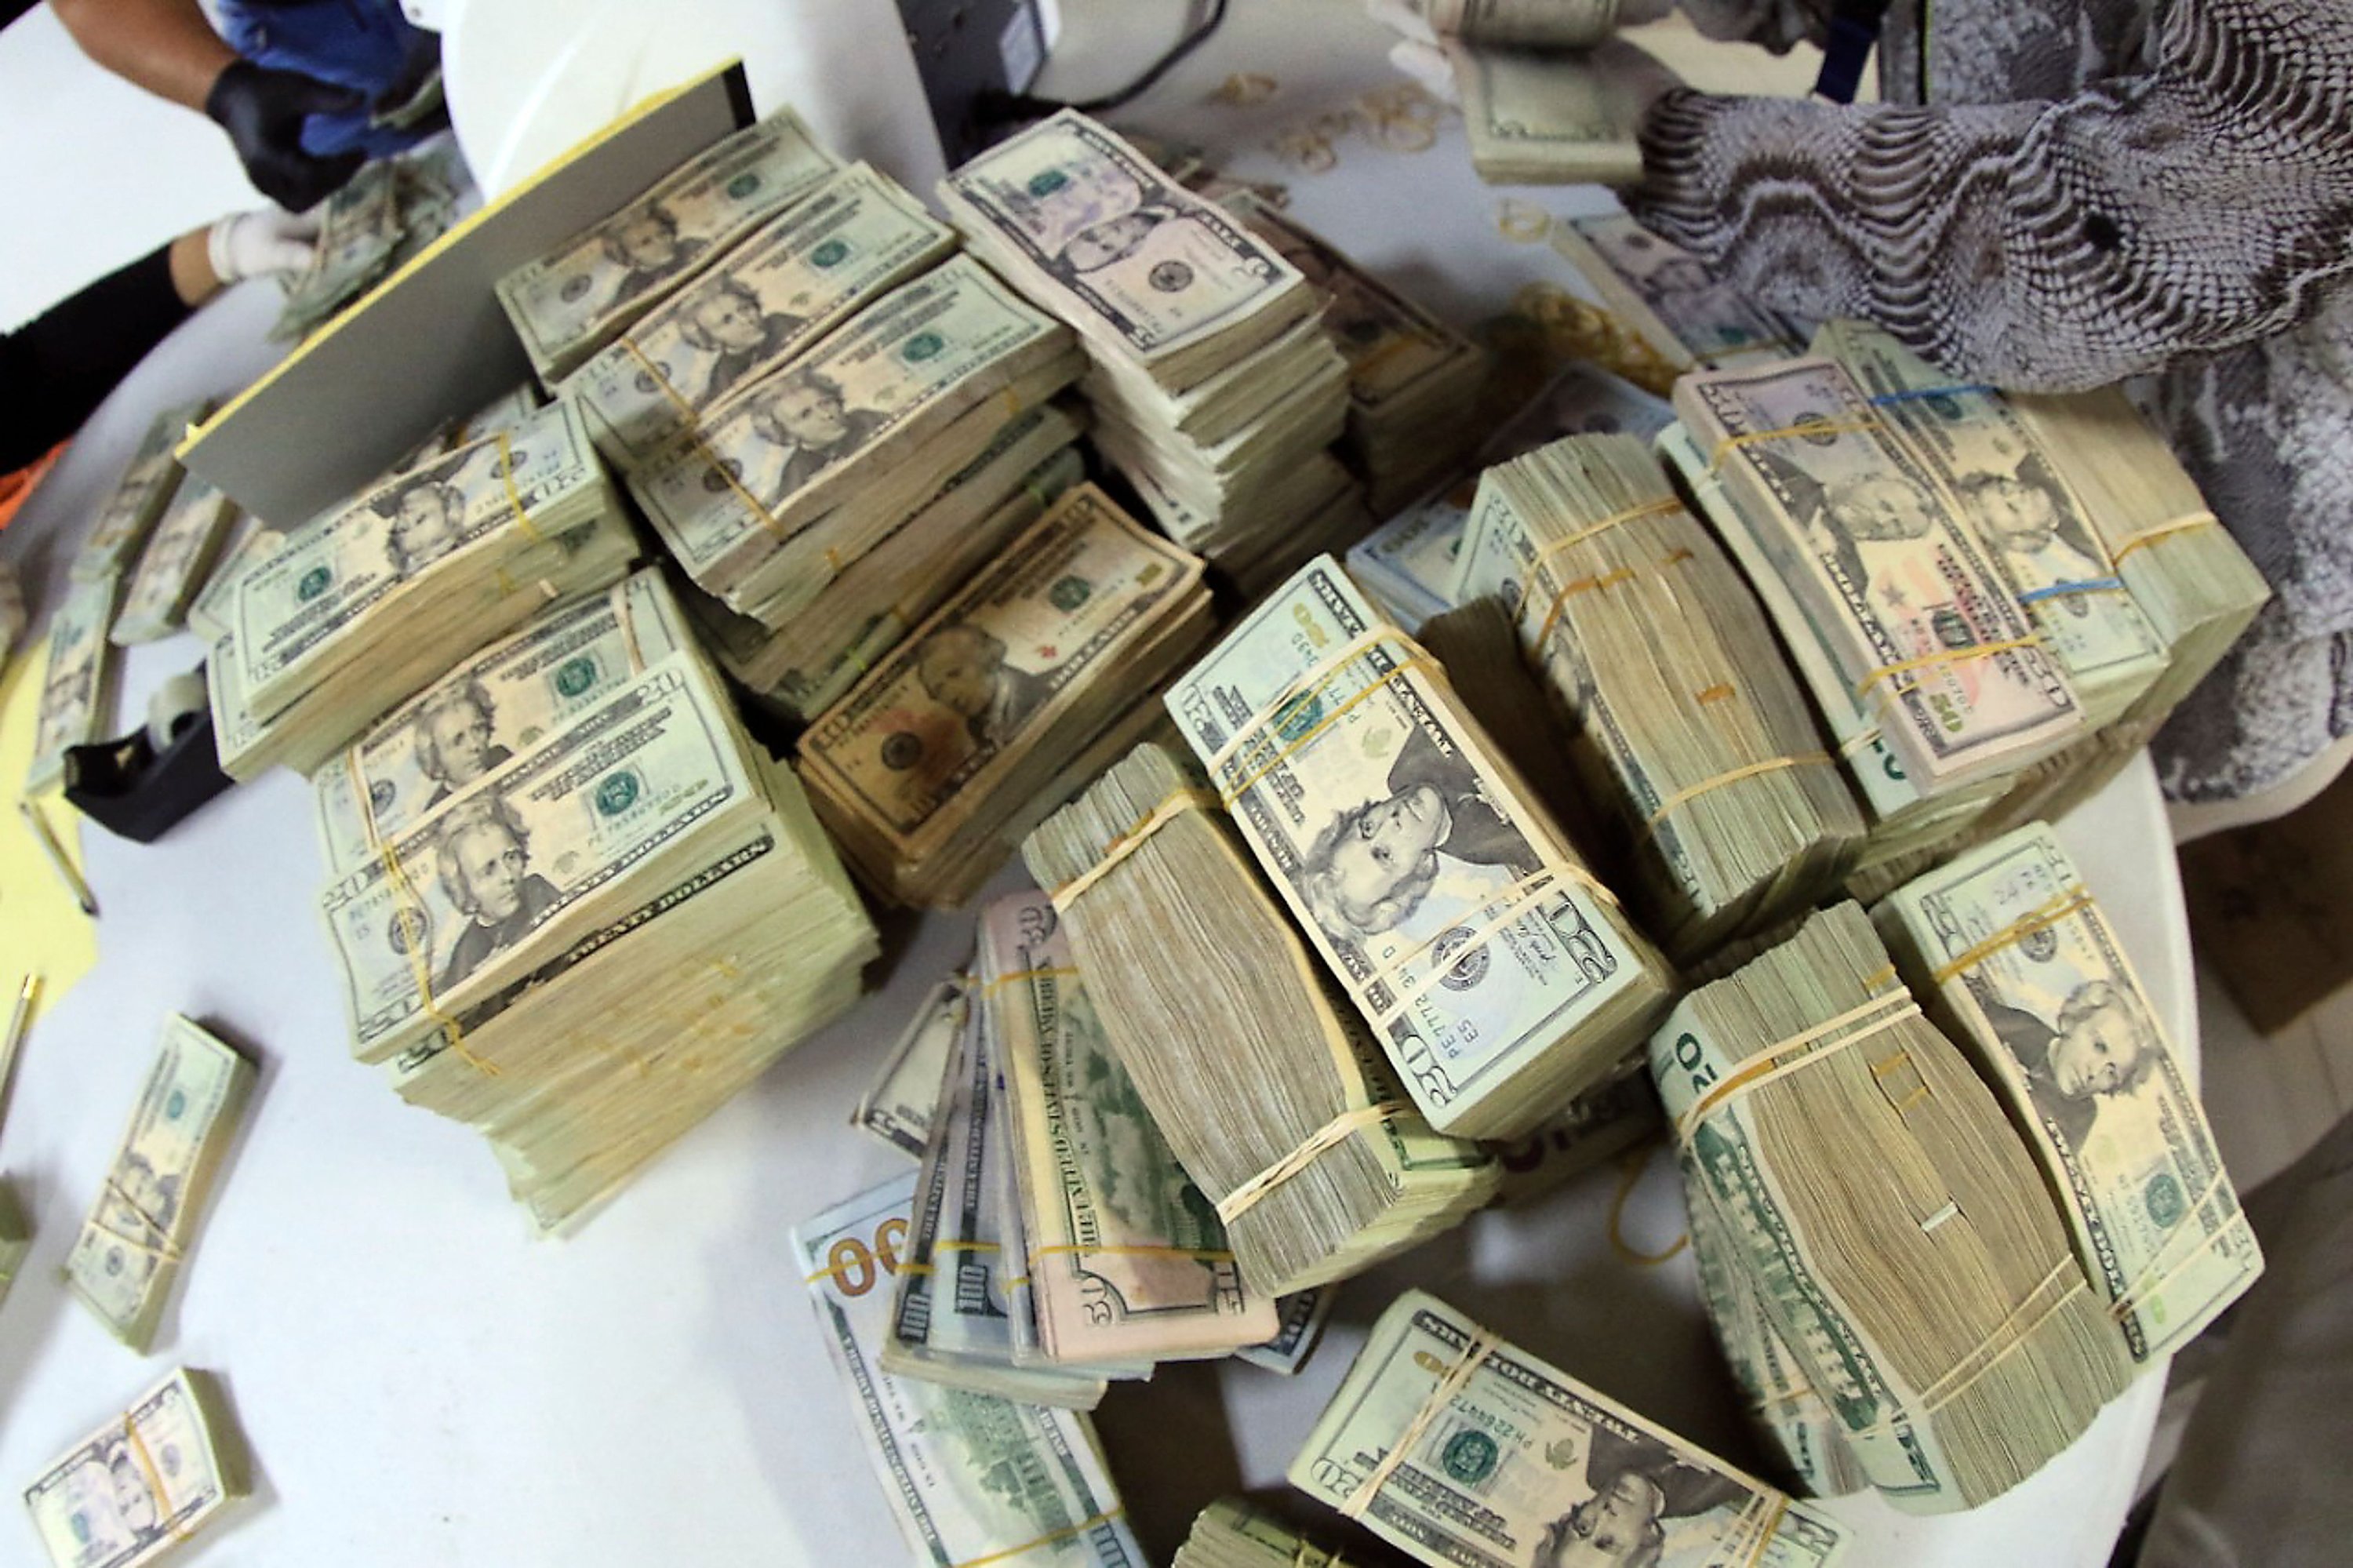 police personnel counting U.S. dollar bills seized from an alleged criminal group linked to Colombia's Clan del Golfo cartel, Colon, Panama, Dec. 2, 2021. (AFP Photo / Panama's National Police Press Office)